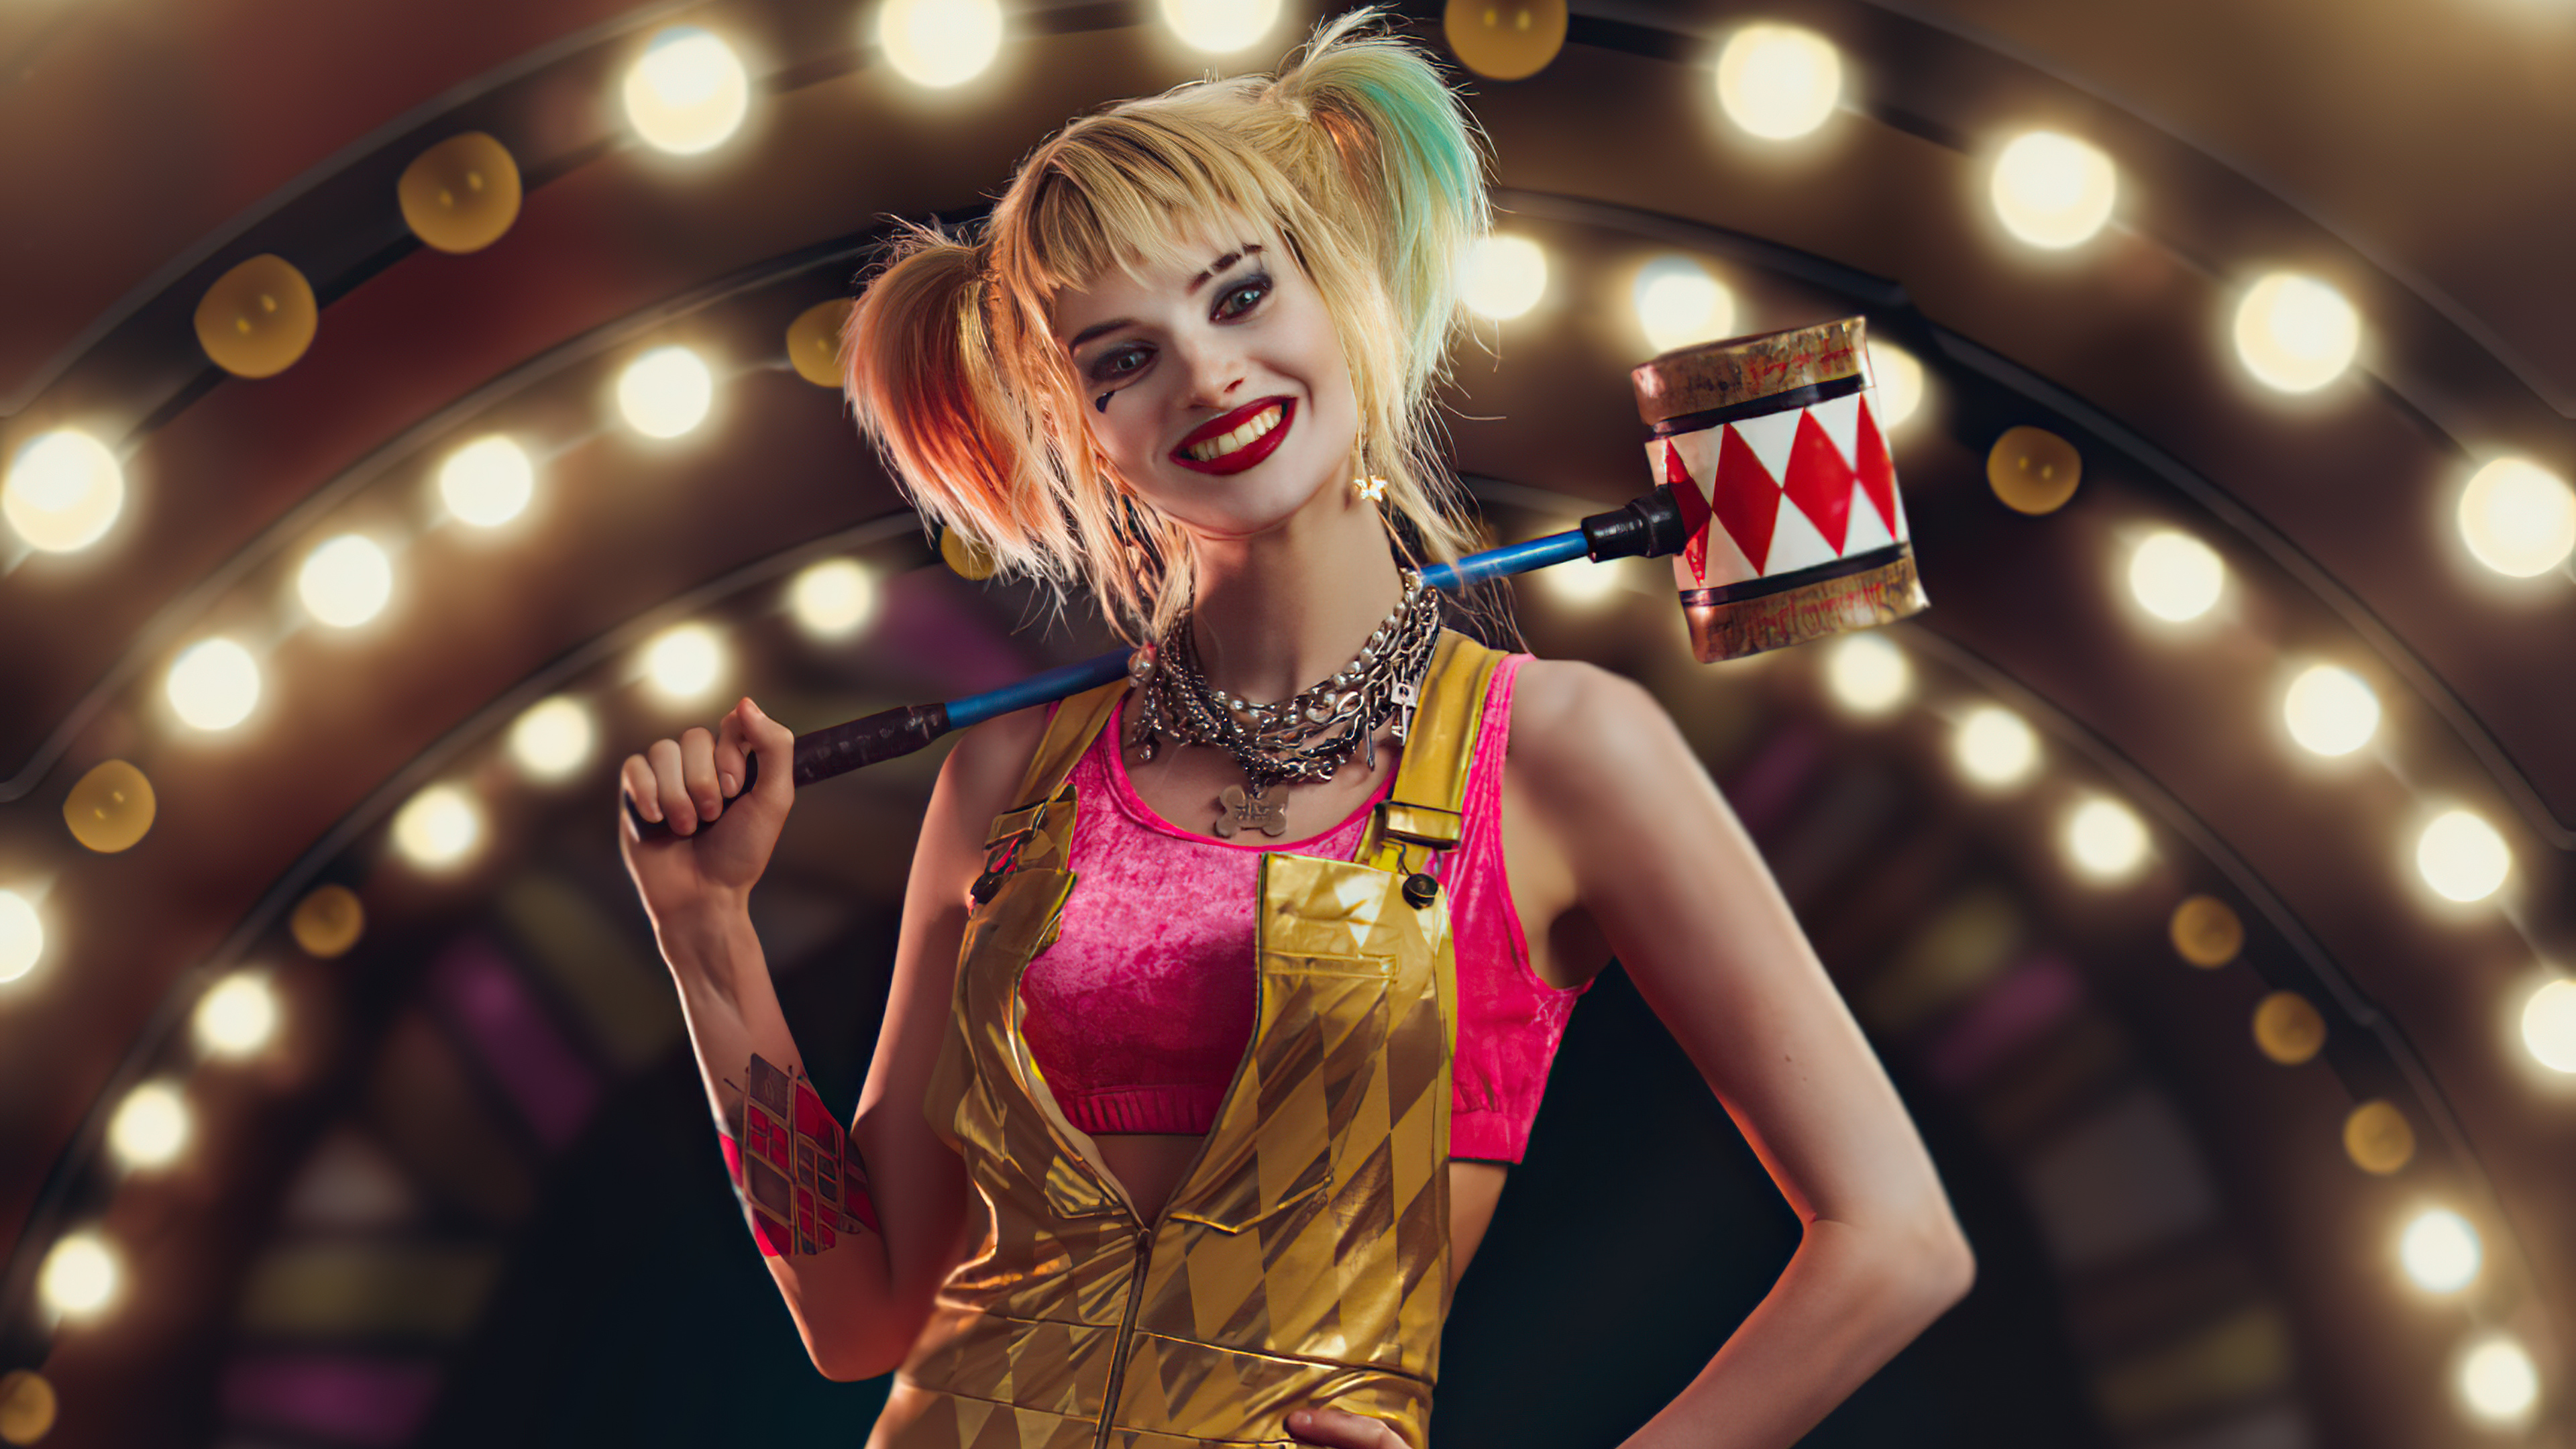 Smiling Harley Quinn with a sledgehammer